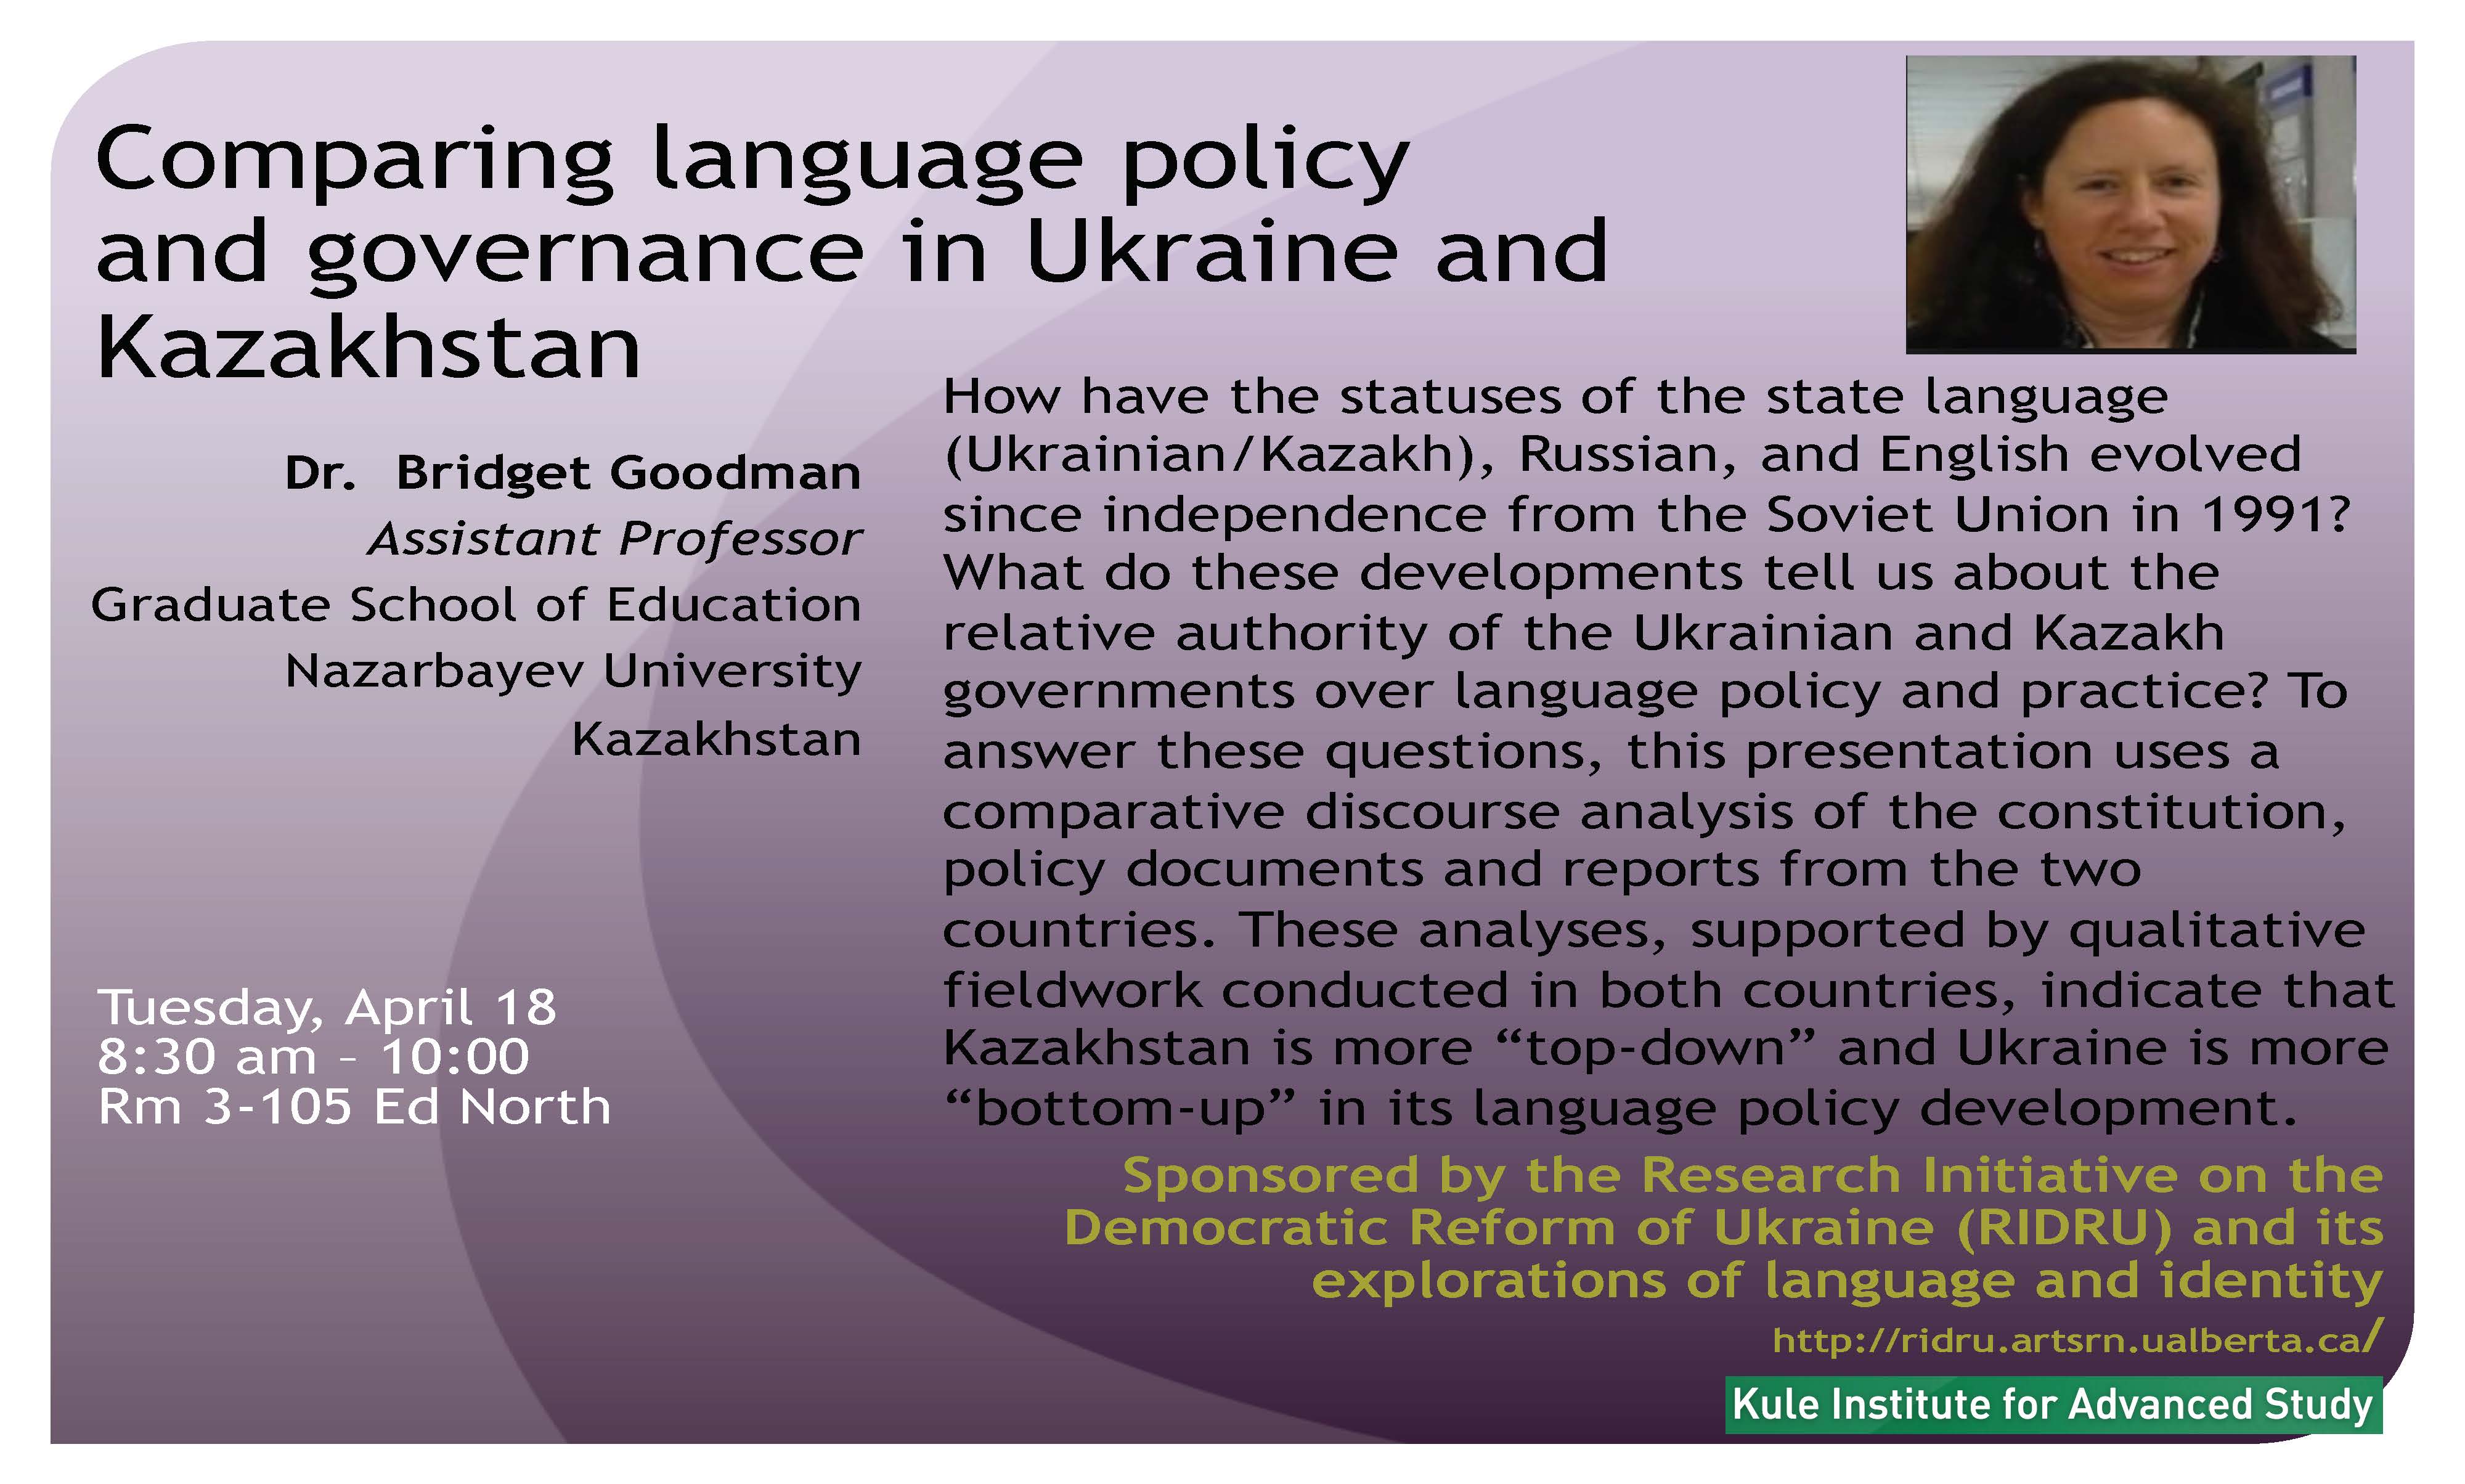 Dr. Bridget Goodman “Comparing language policy and governance in Ukraine and Kazakhstan”